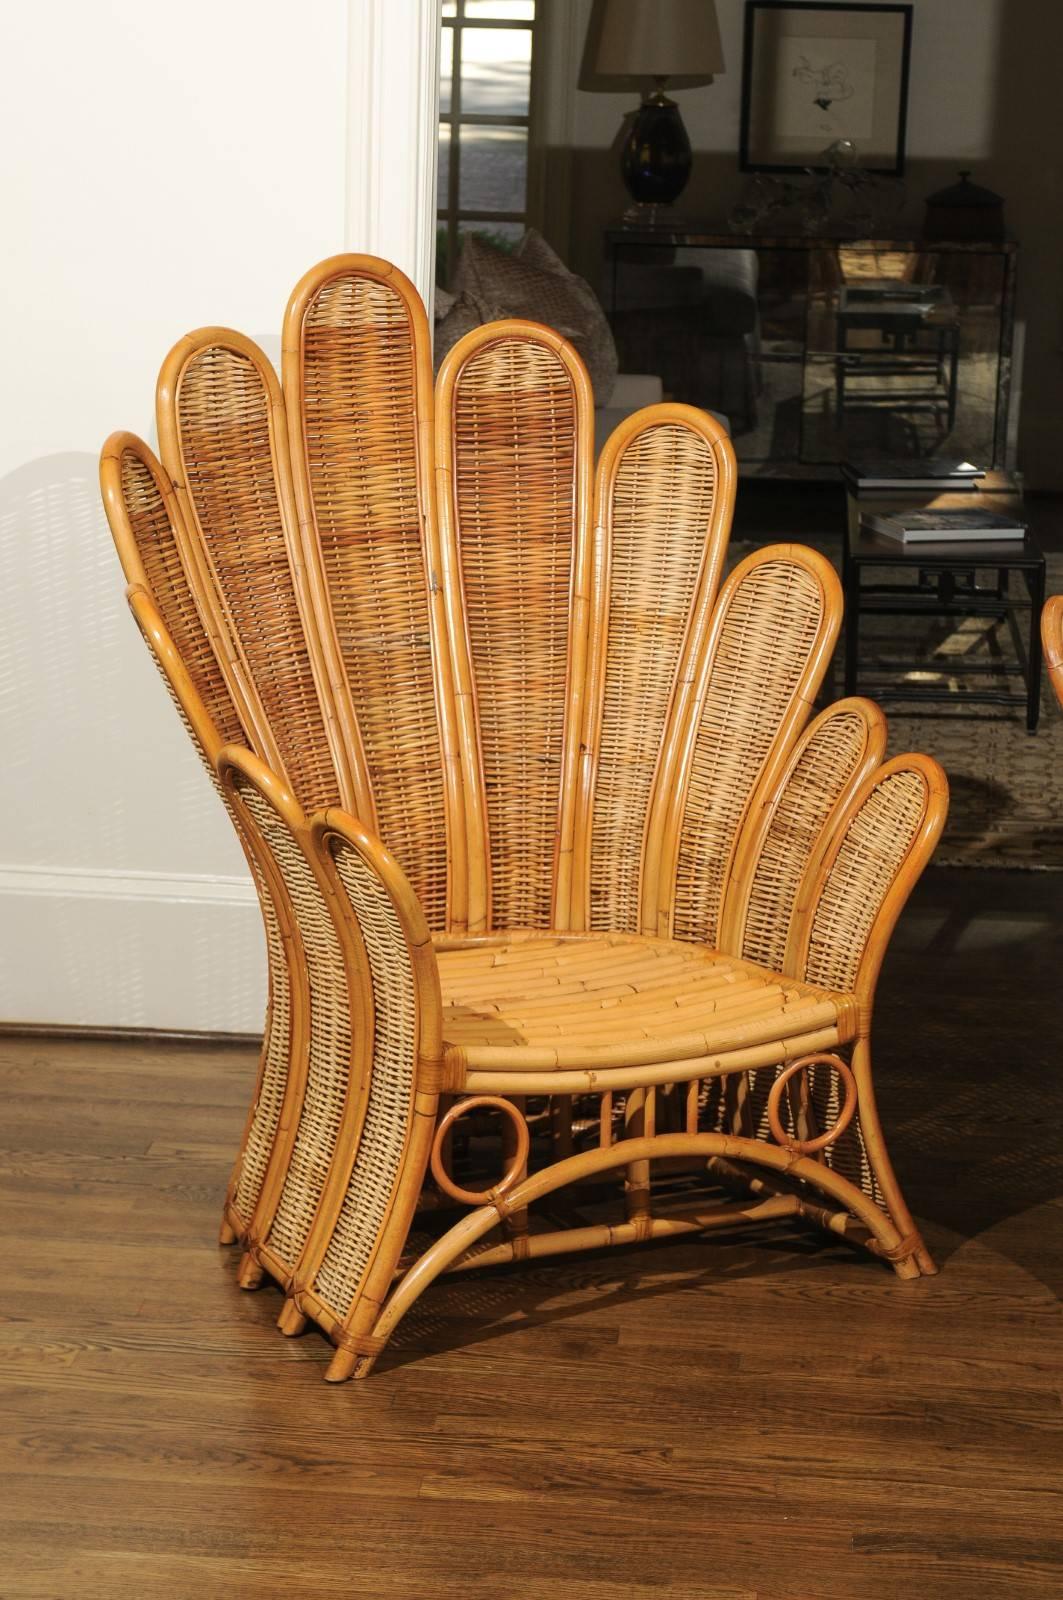 palm frond furniture